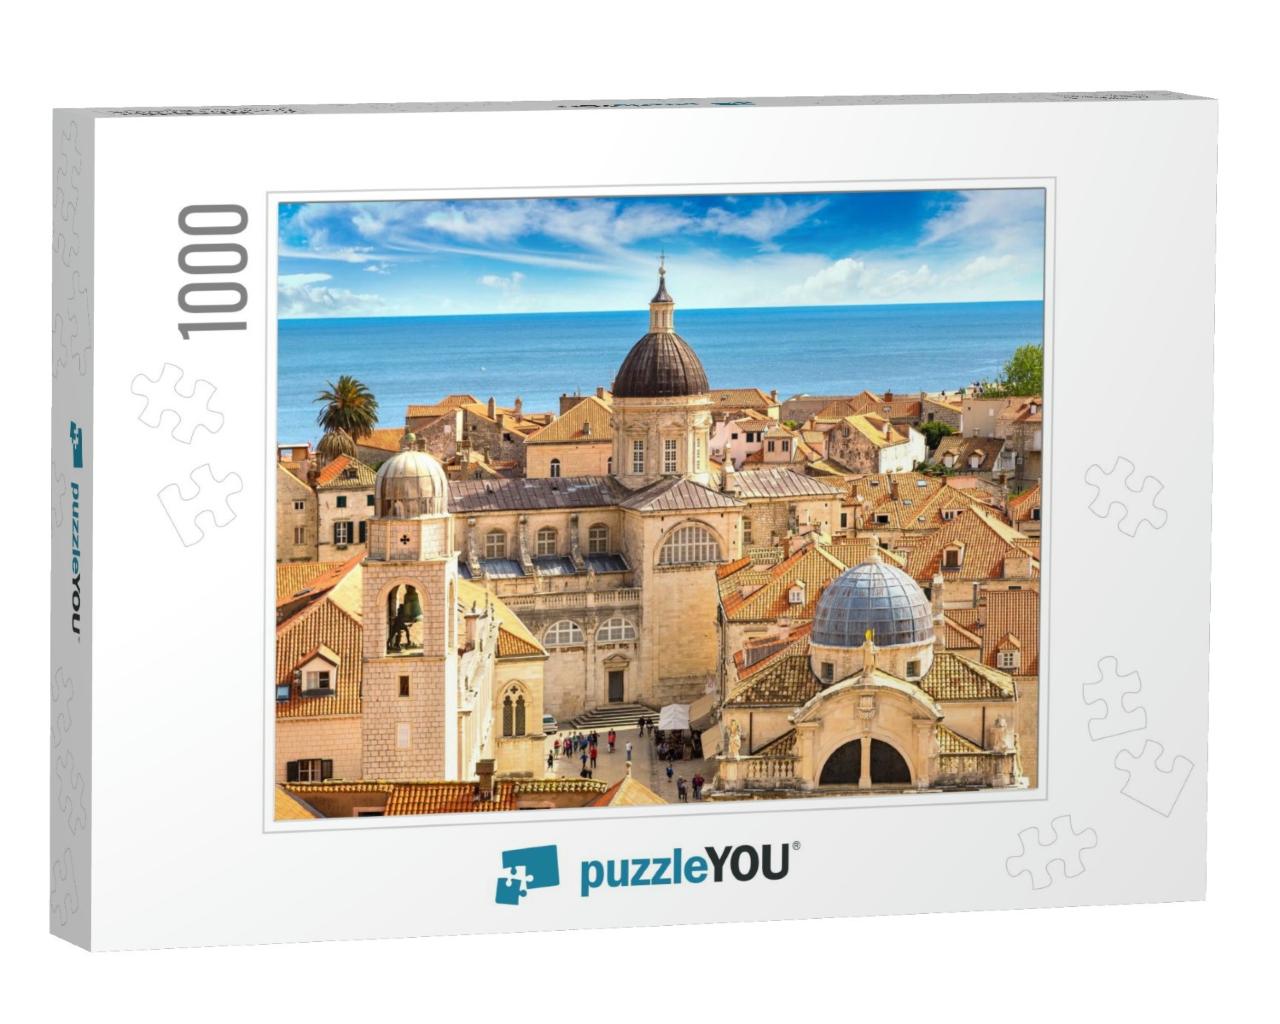 Old City Dubrovnik in a Beautiful Summer Day, Croatia... Jigsaw Puzzle with 1000 pieces